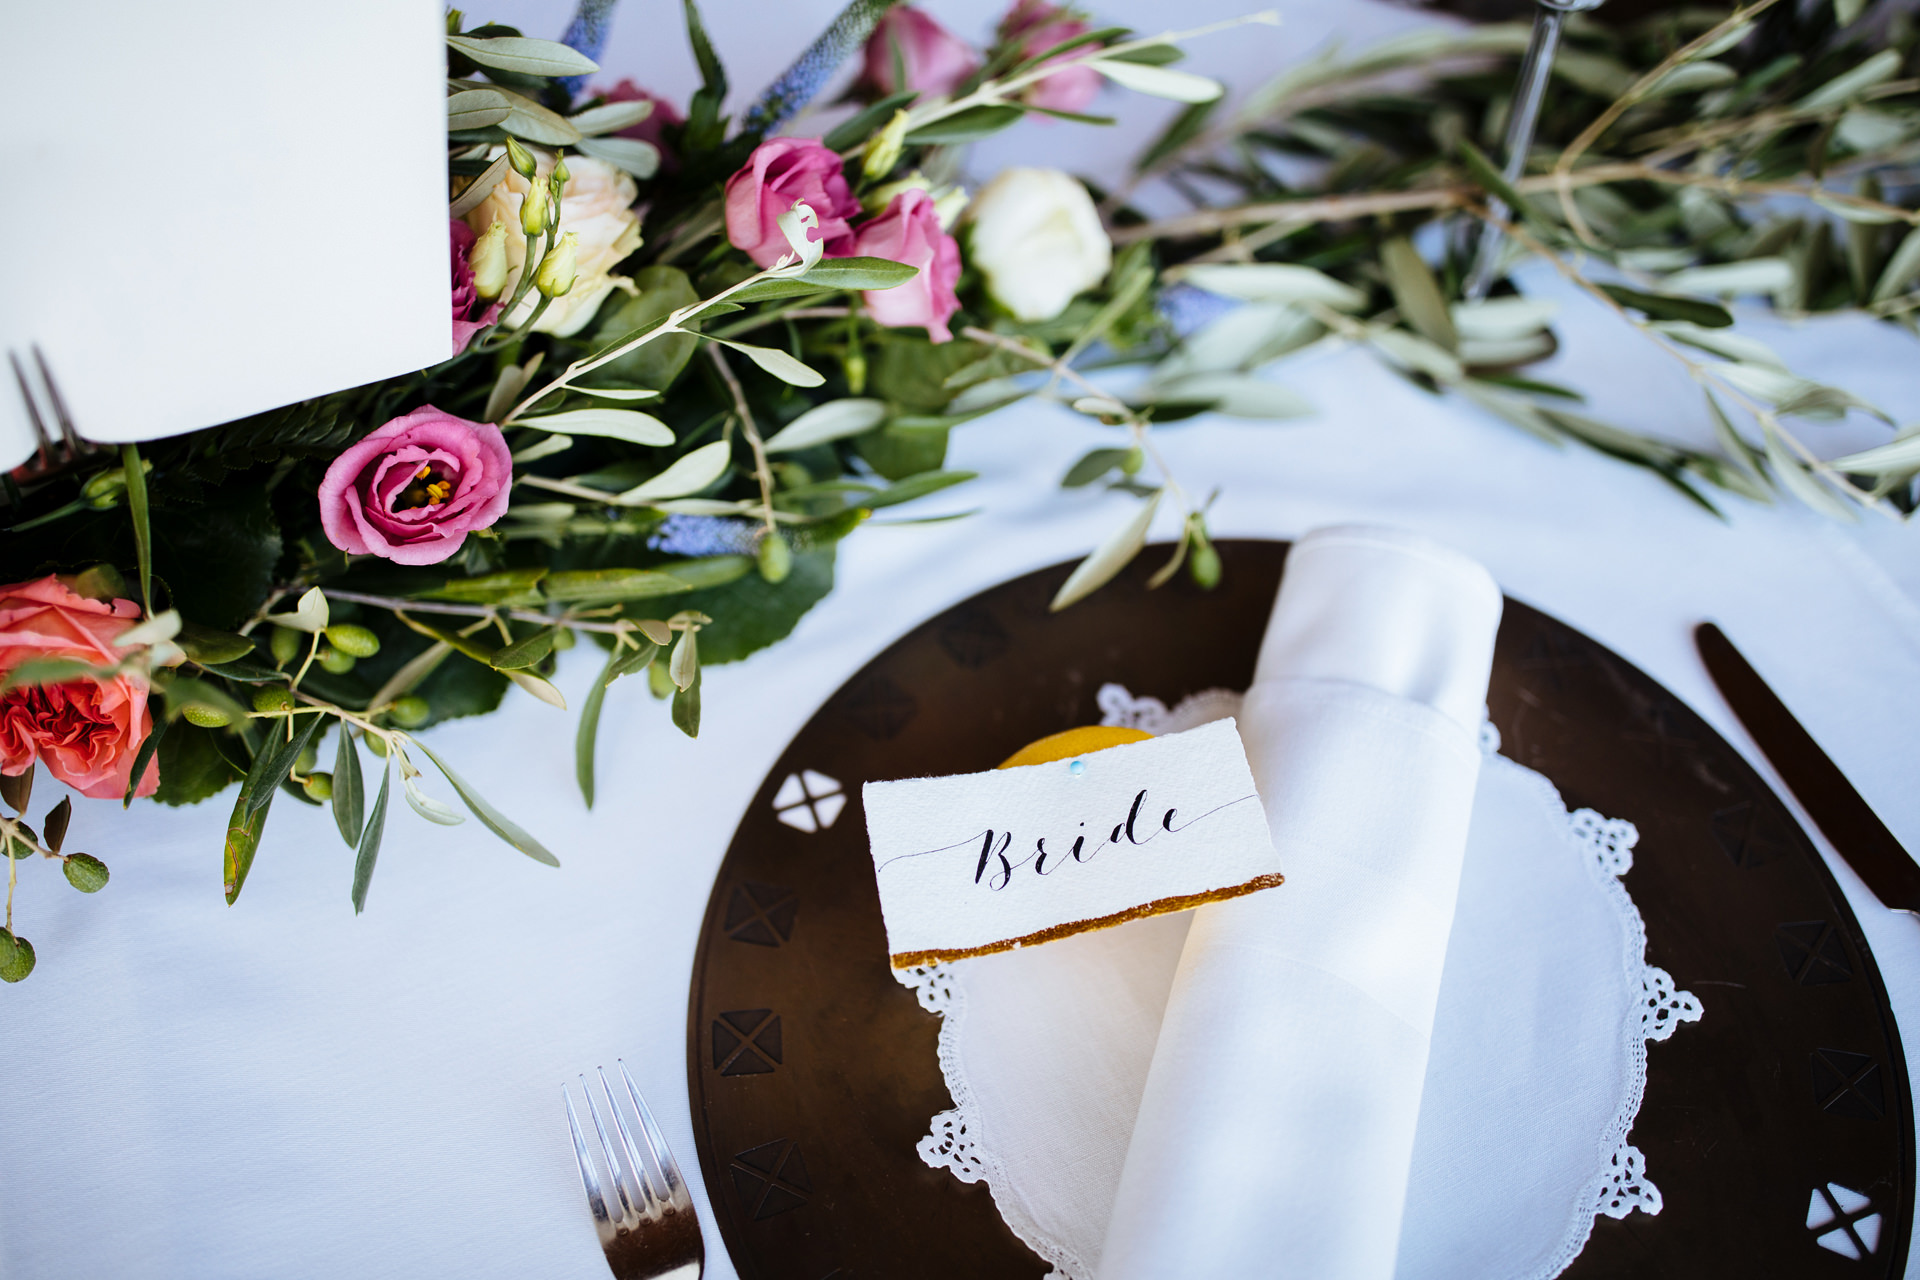 roses and bride place name on table